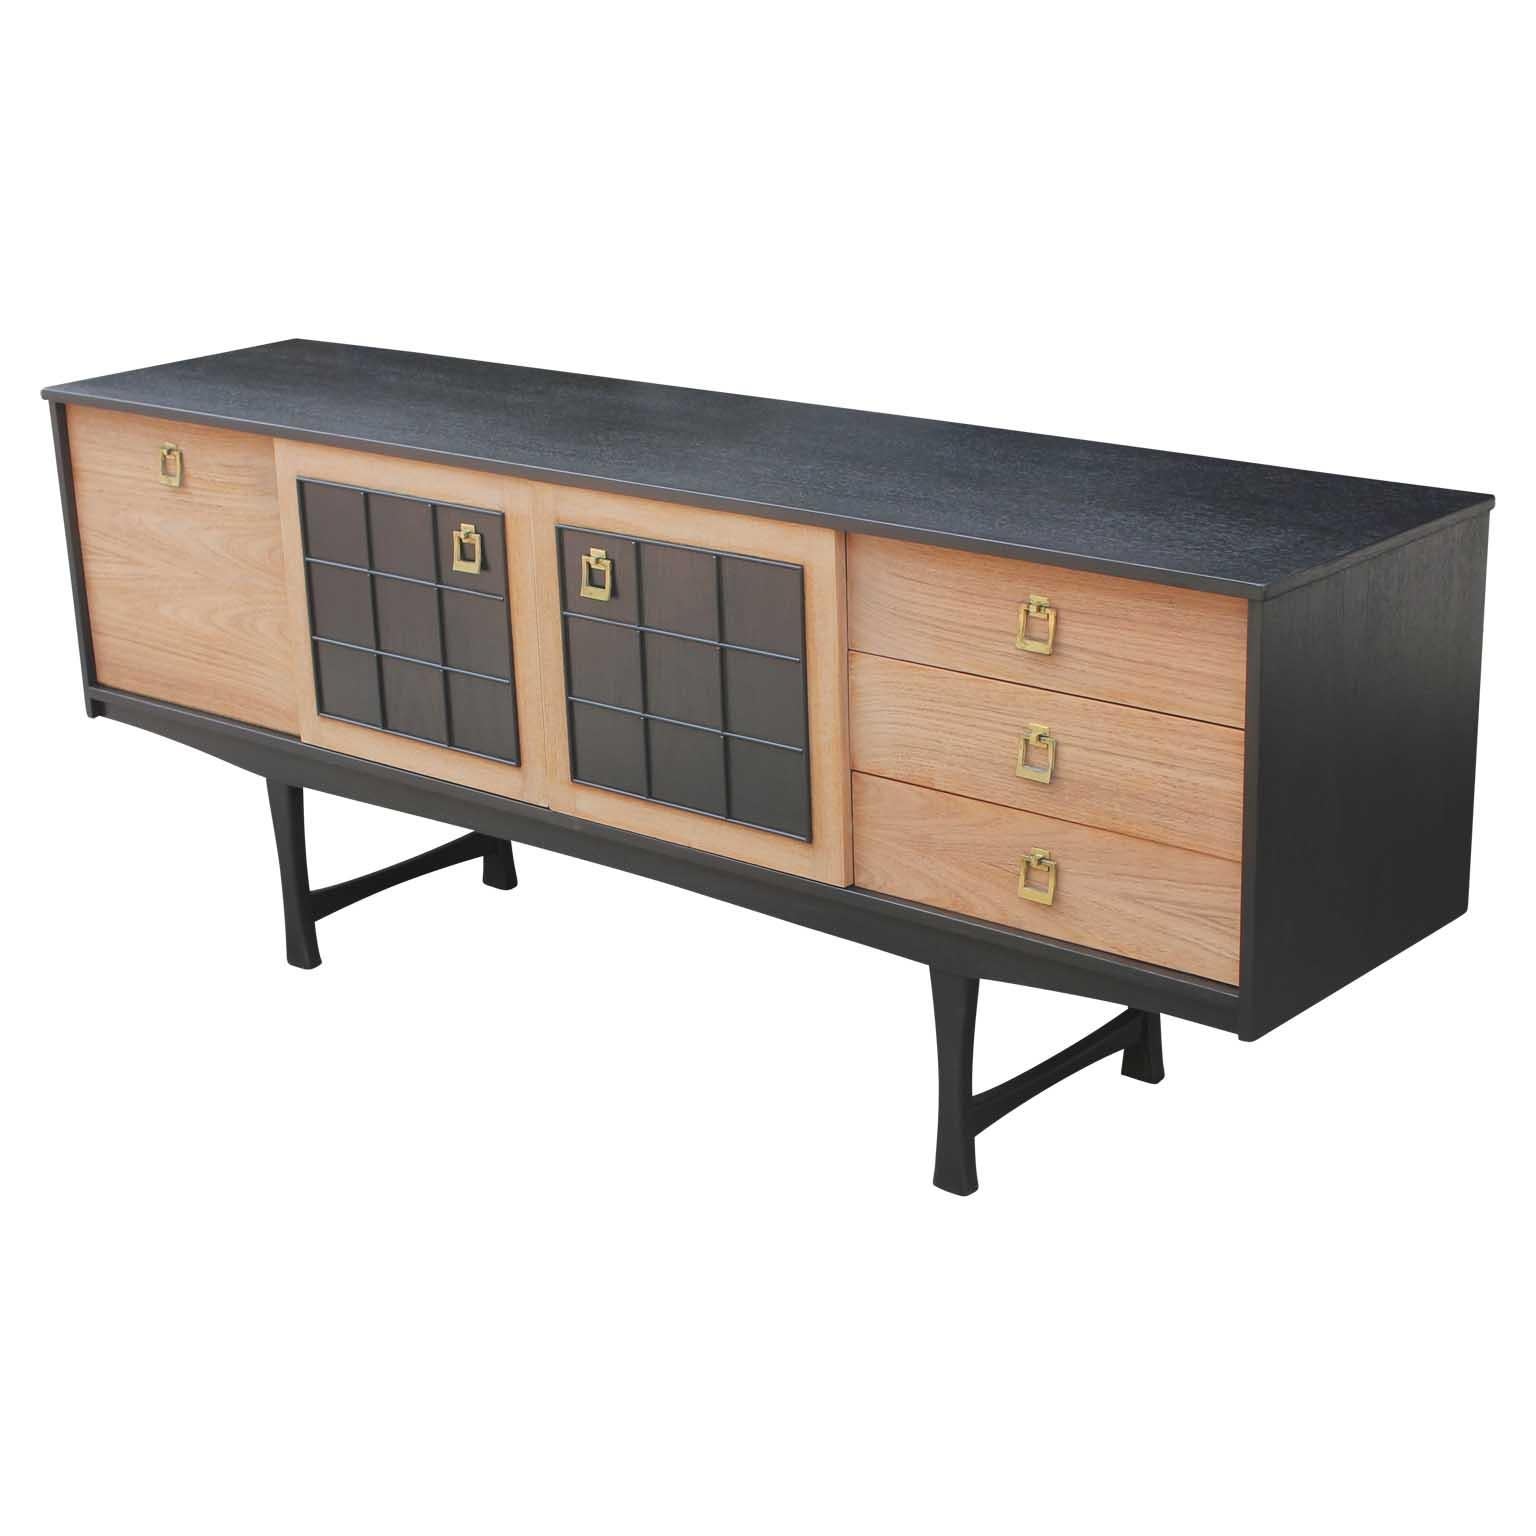 Modern credenza / sideboard freshly refinished in a lovely two-tone manner in the style of Baker Furniture with brass hardware. This piece features two cabinet spaces on the left and three drawers on the right.